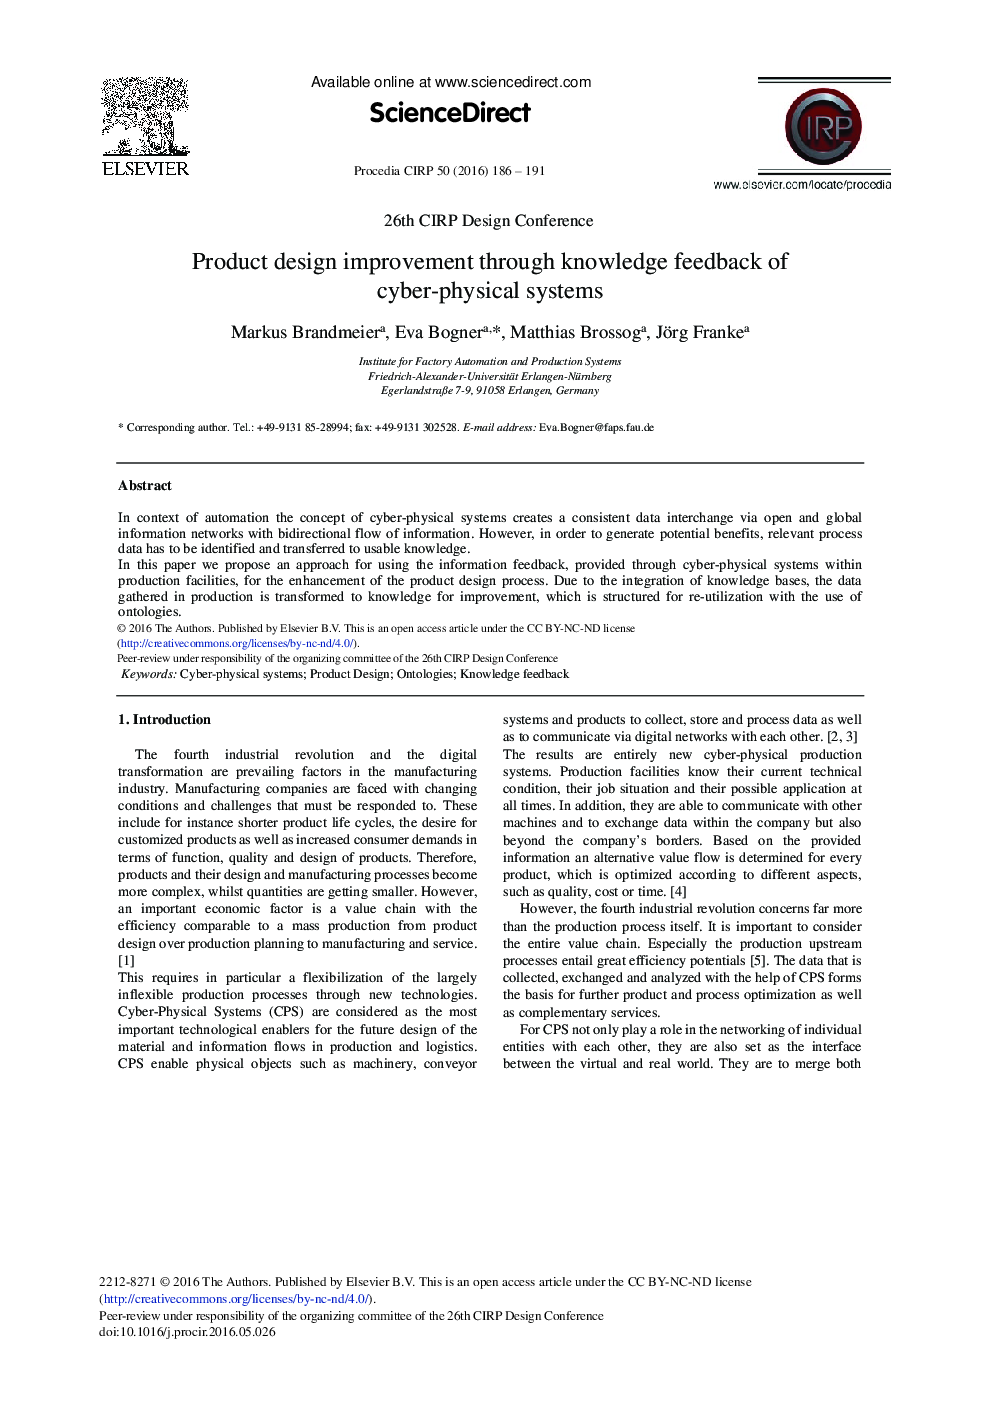 Product Design Improvement Through Knowledge Feedback of Cyber-physical Systems 